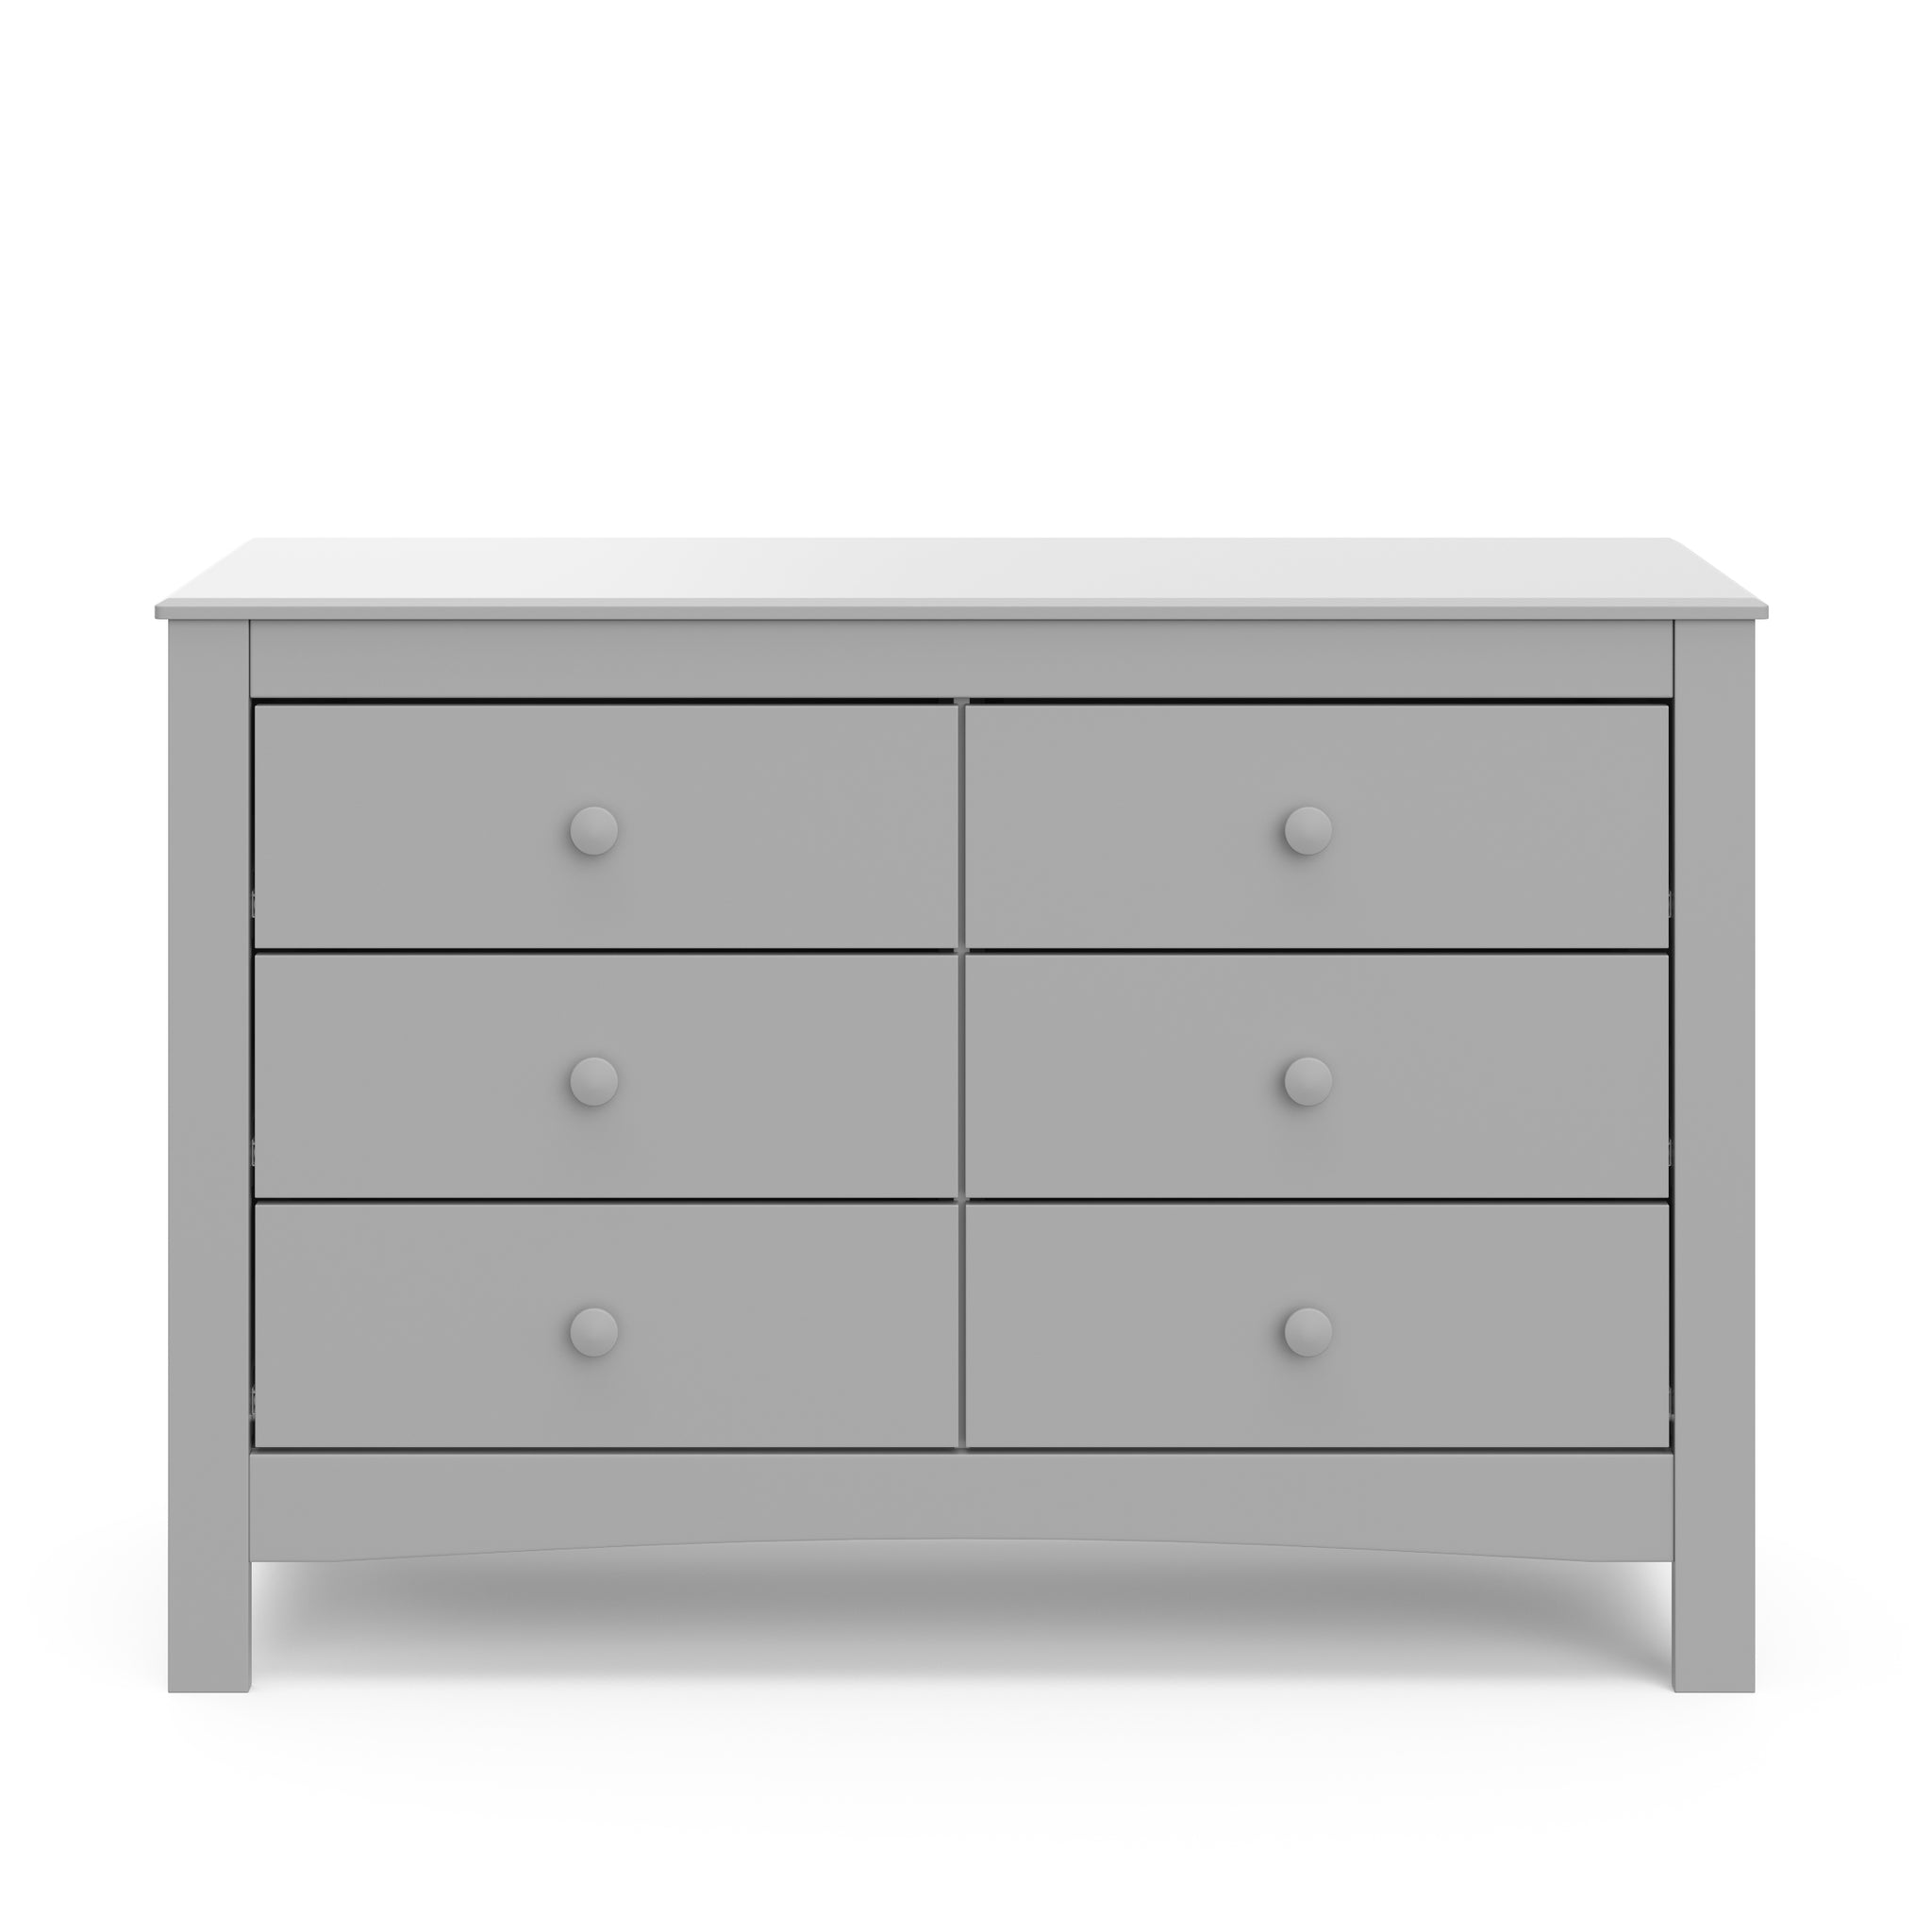 Front view of pebble gray 6 drawer dresser